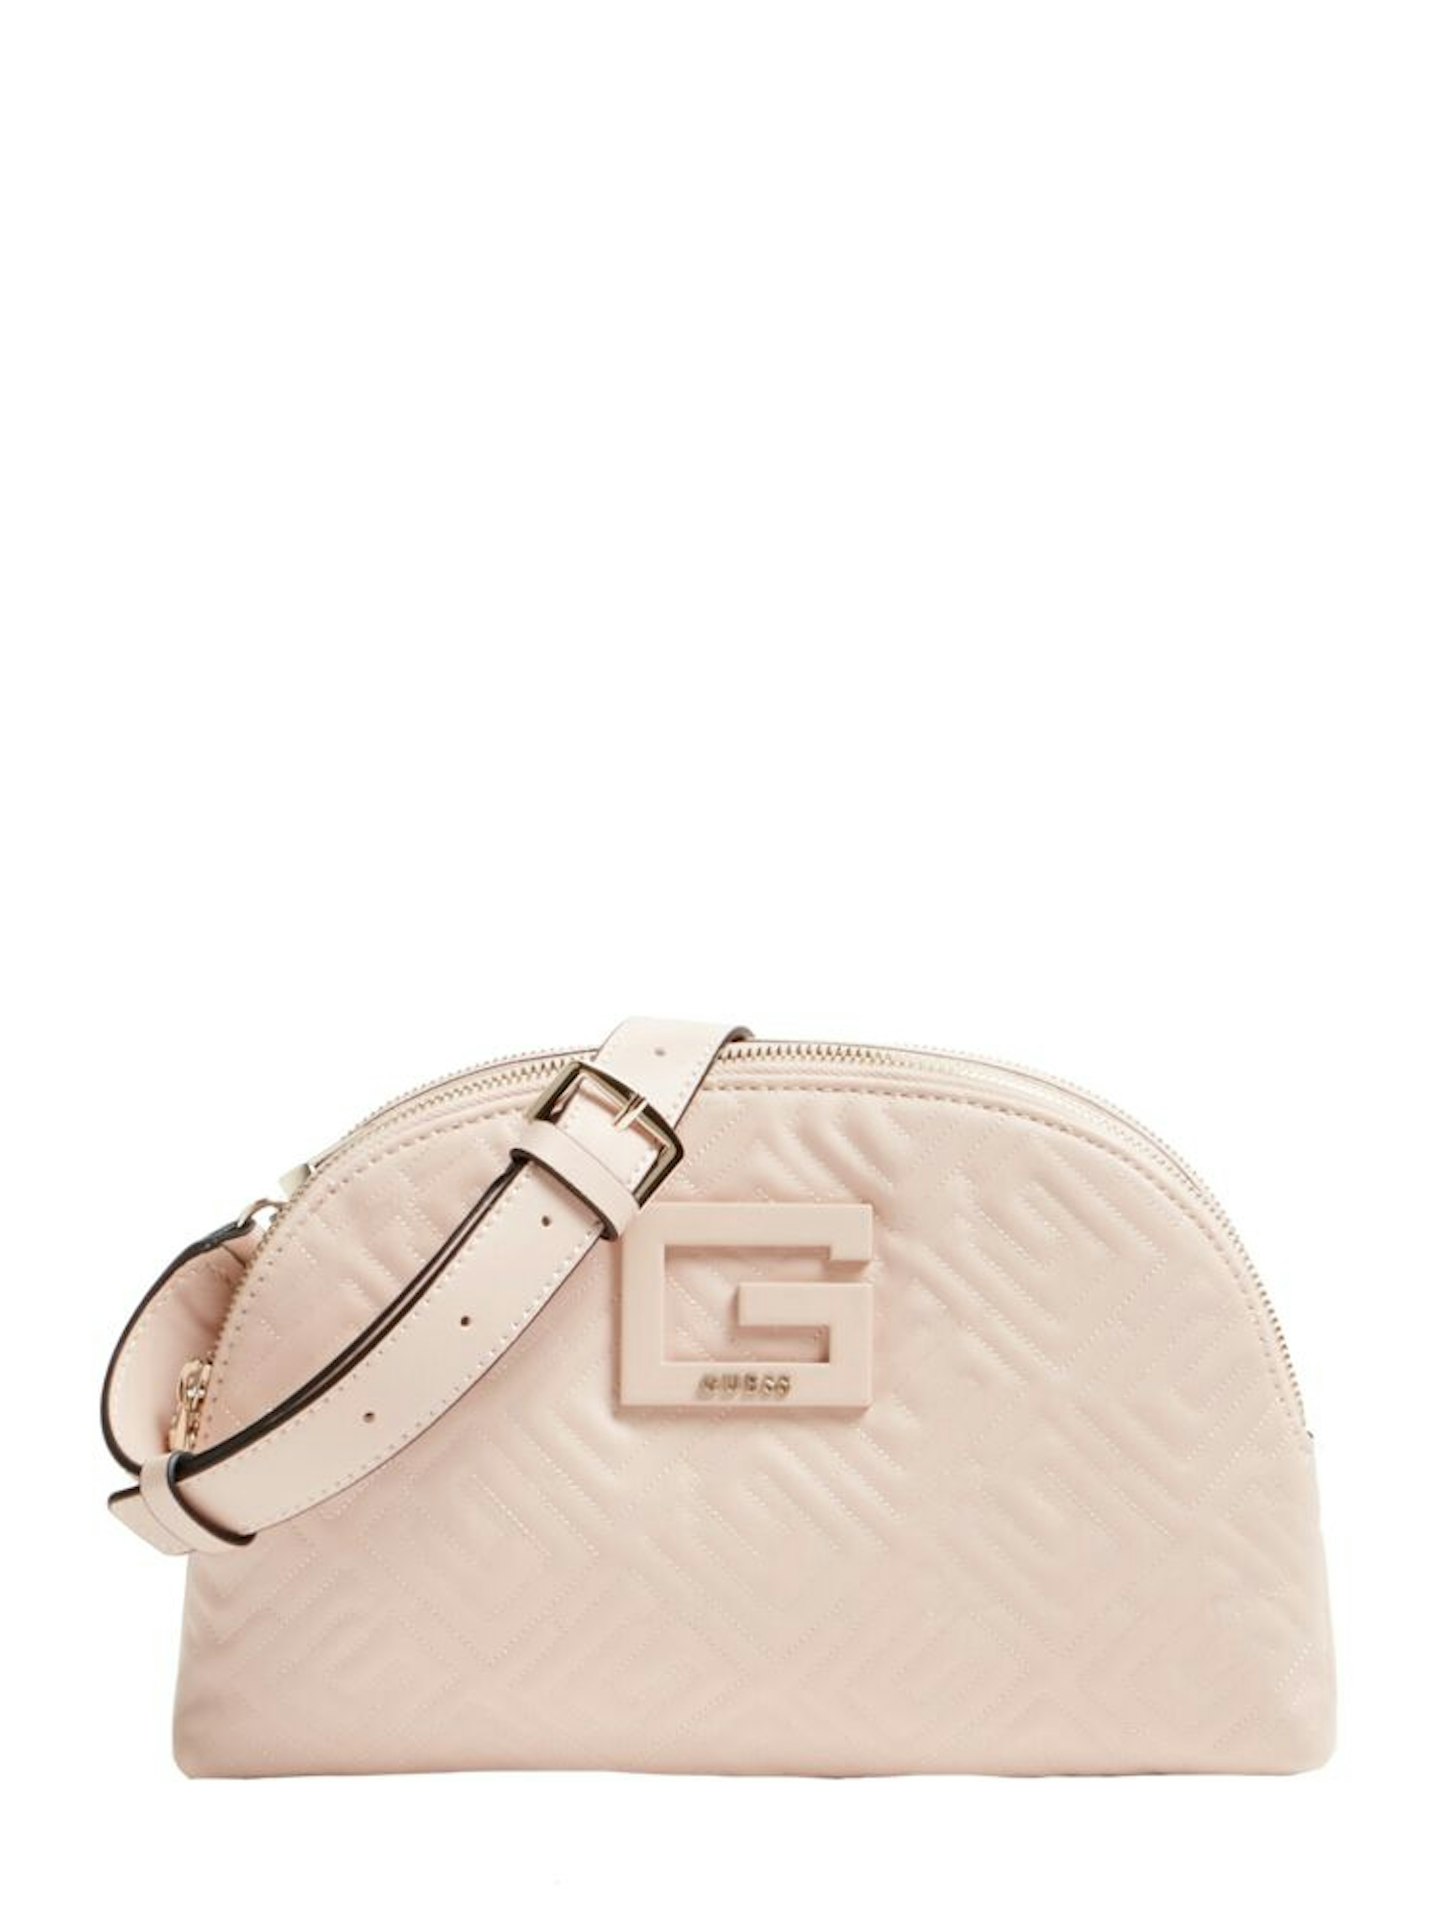 Guess, Janay Quilted Crossbody, £99